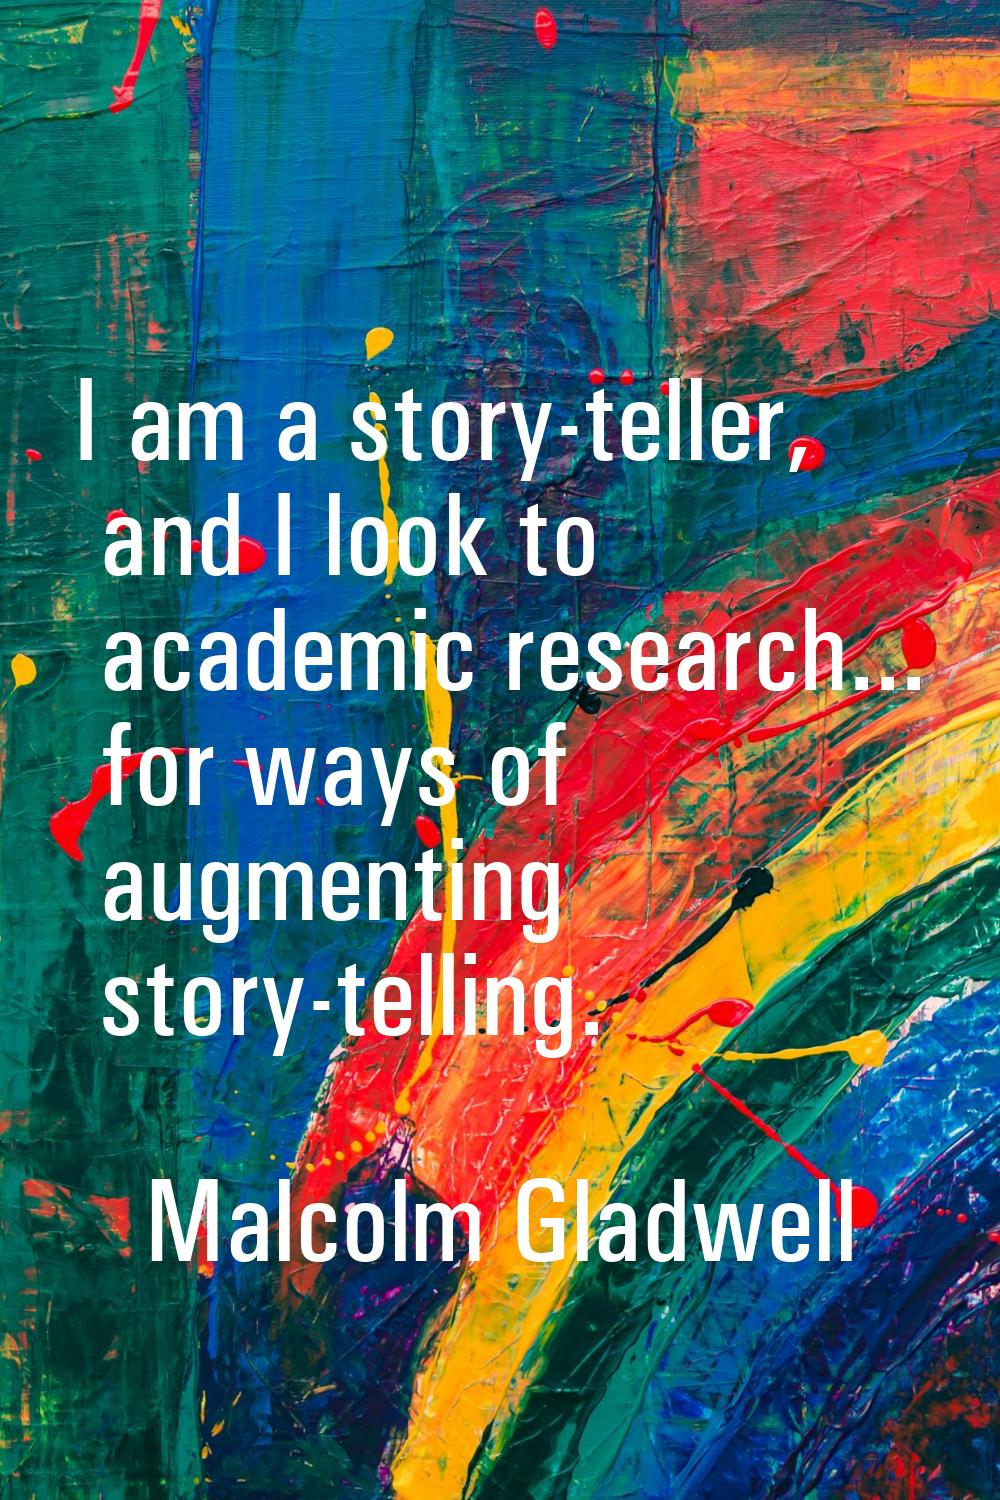 I am a story-teller, and I look to academic research... for ways of augmenting story-telling.